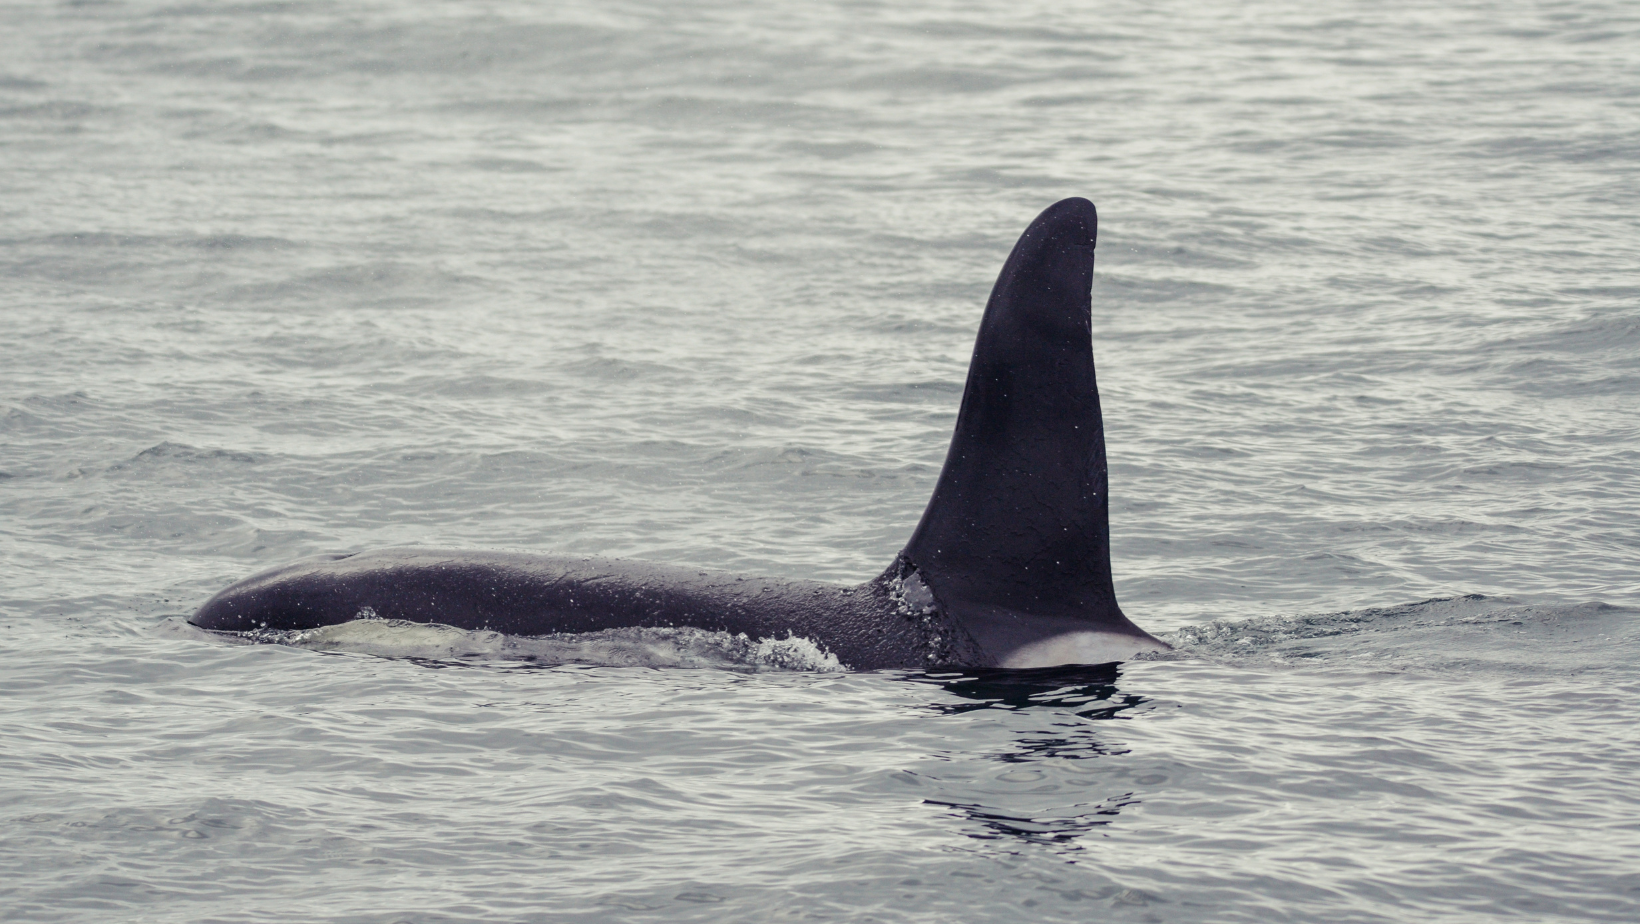 Dorsal fin of an Orca in the water off of Iceland